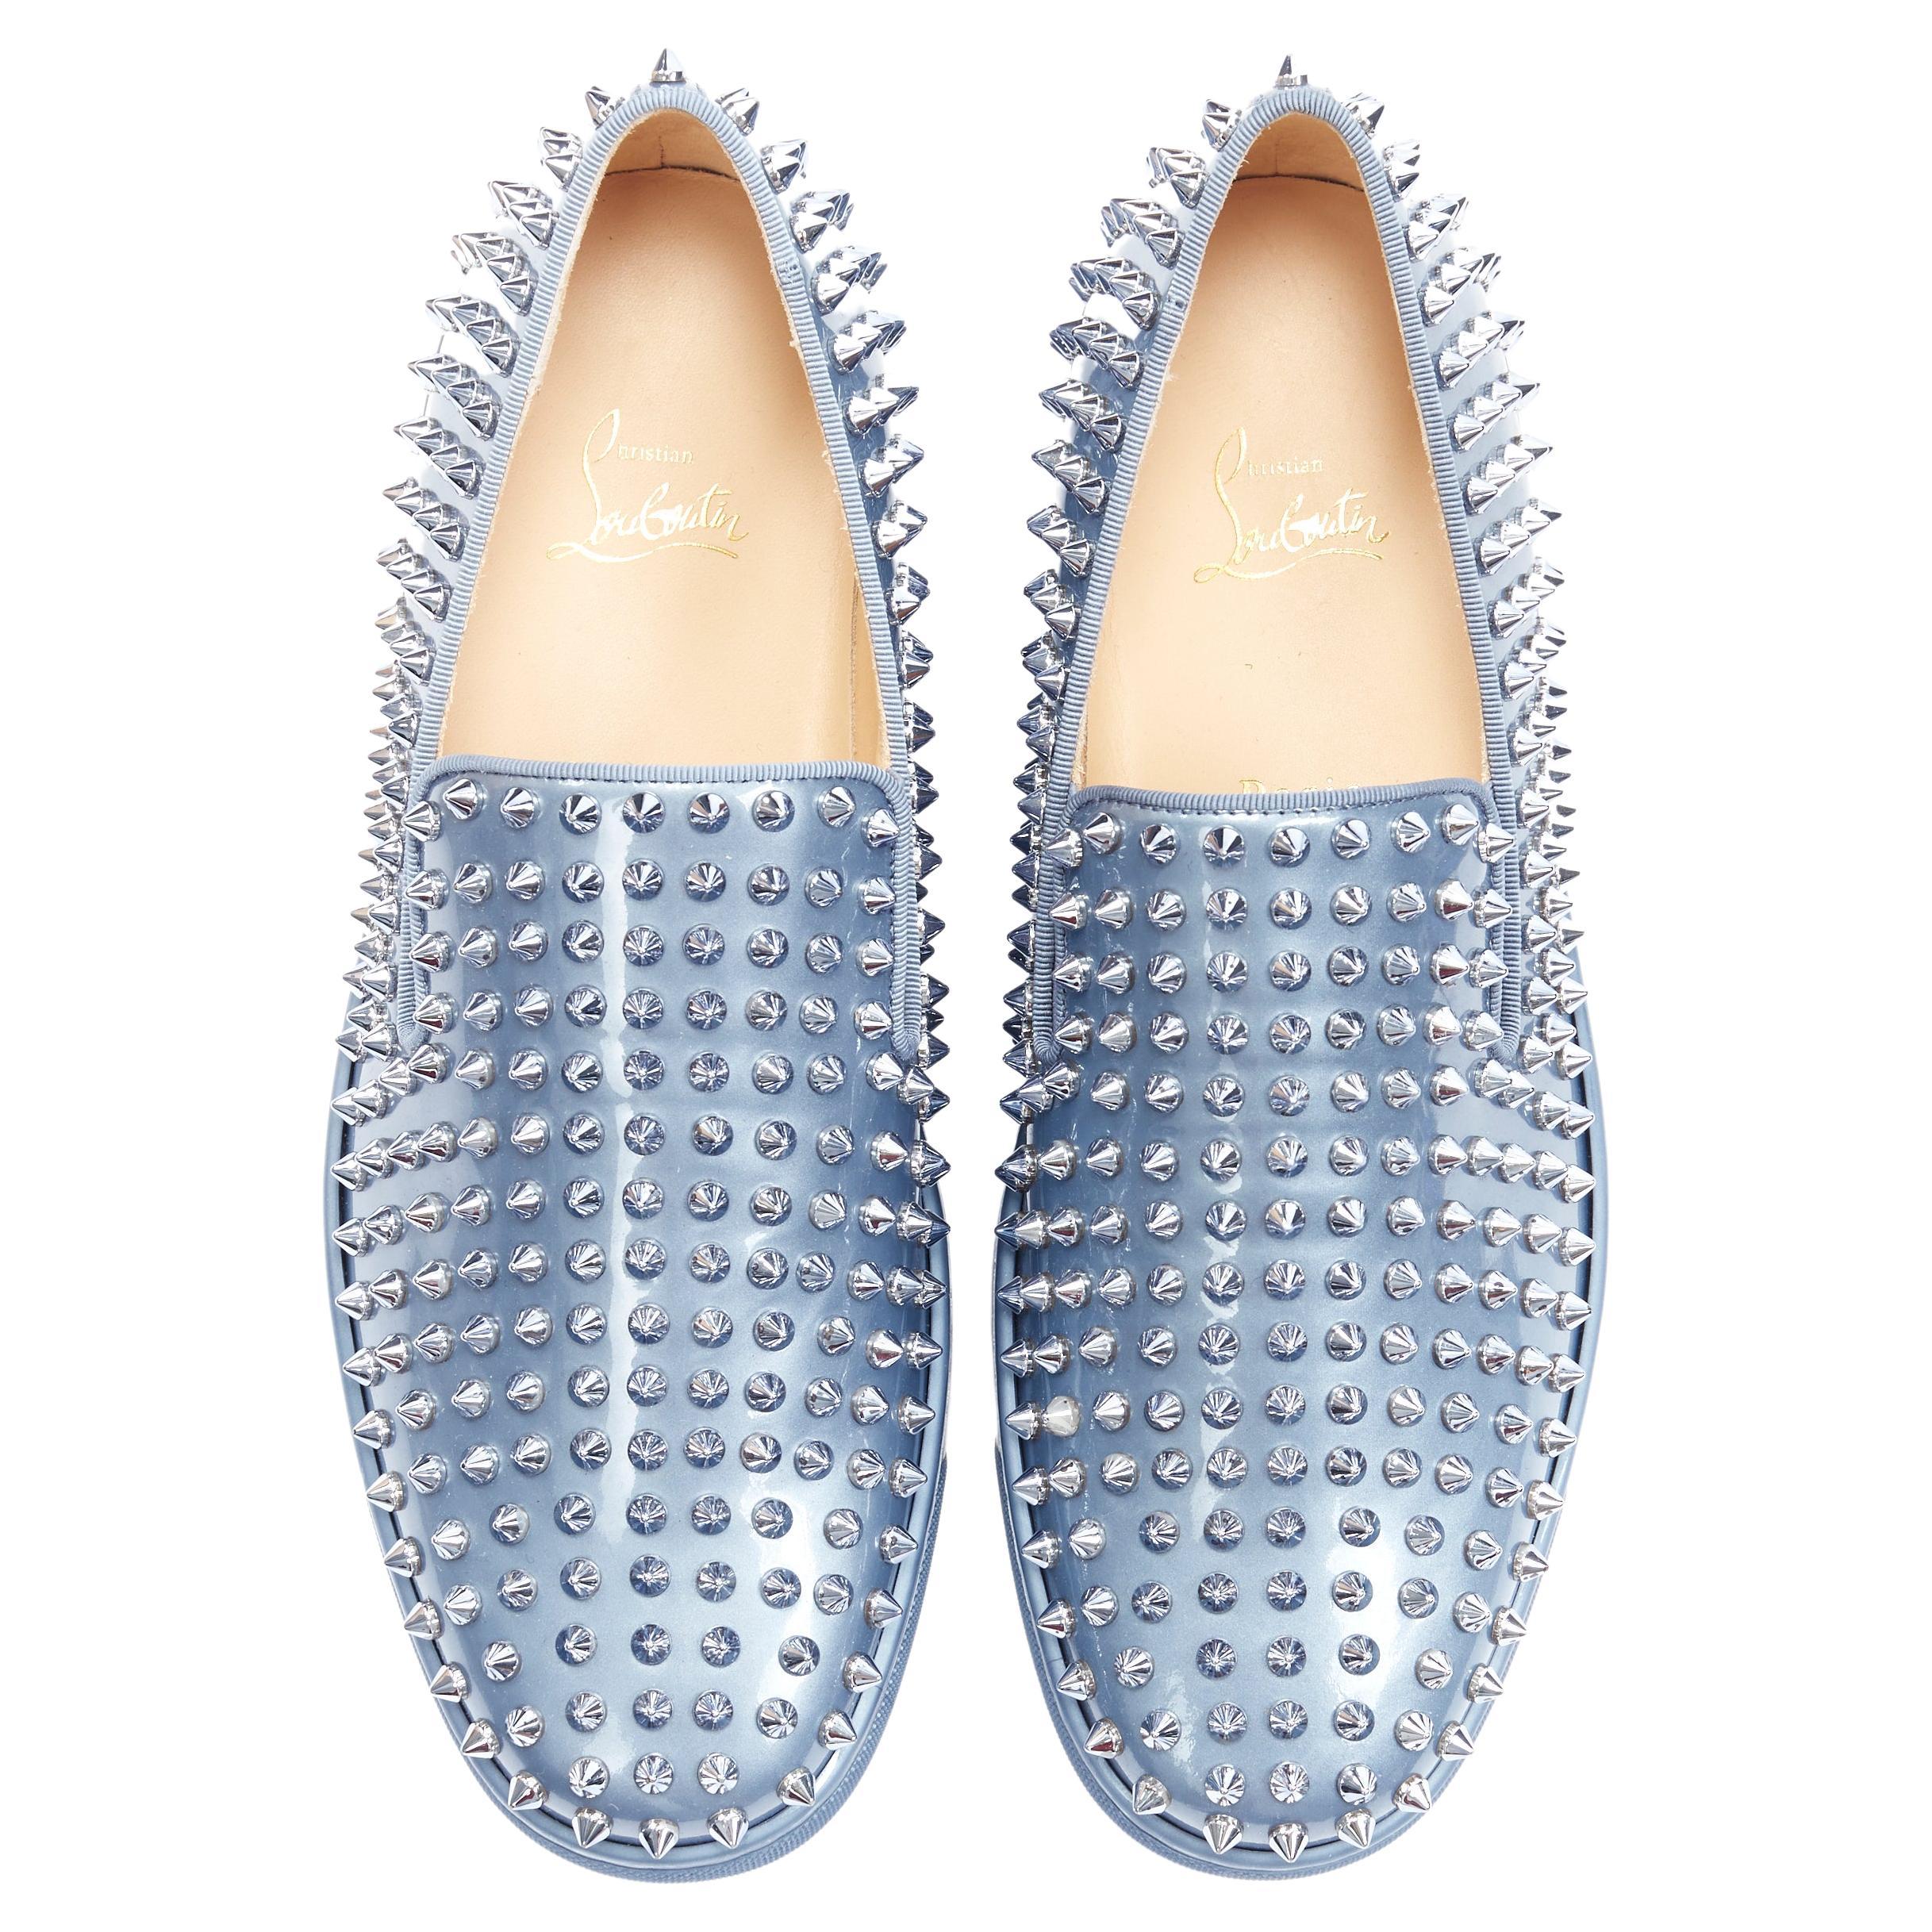 new CHRISTIAN LOUBOUTIN Roller Boat light blue patent spike stud sneaker EU41.5 
Reference: TGAS/B01272 
Brand: Christian Louboutin 
Designer: Christian Louboutin 
Model: Roller Boat 
Material: Patent Leather
Color: Blue 
Pattern: Solid 
Extra